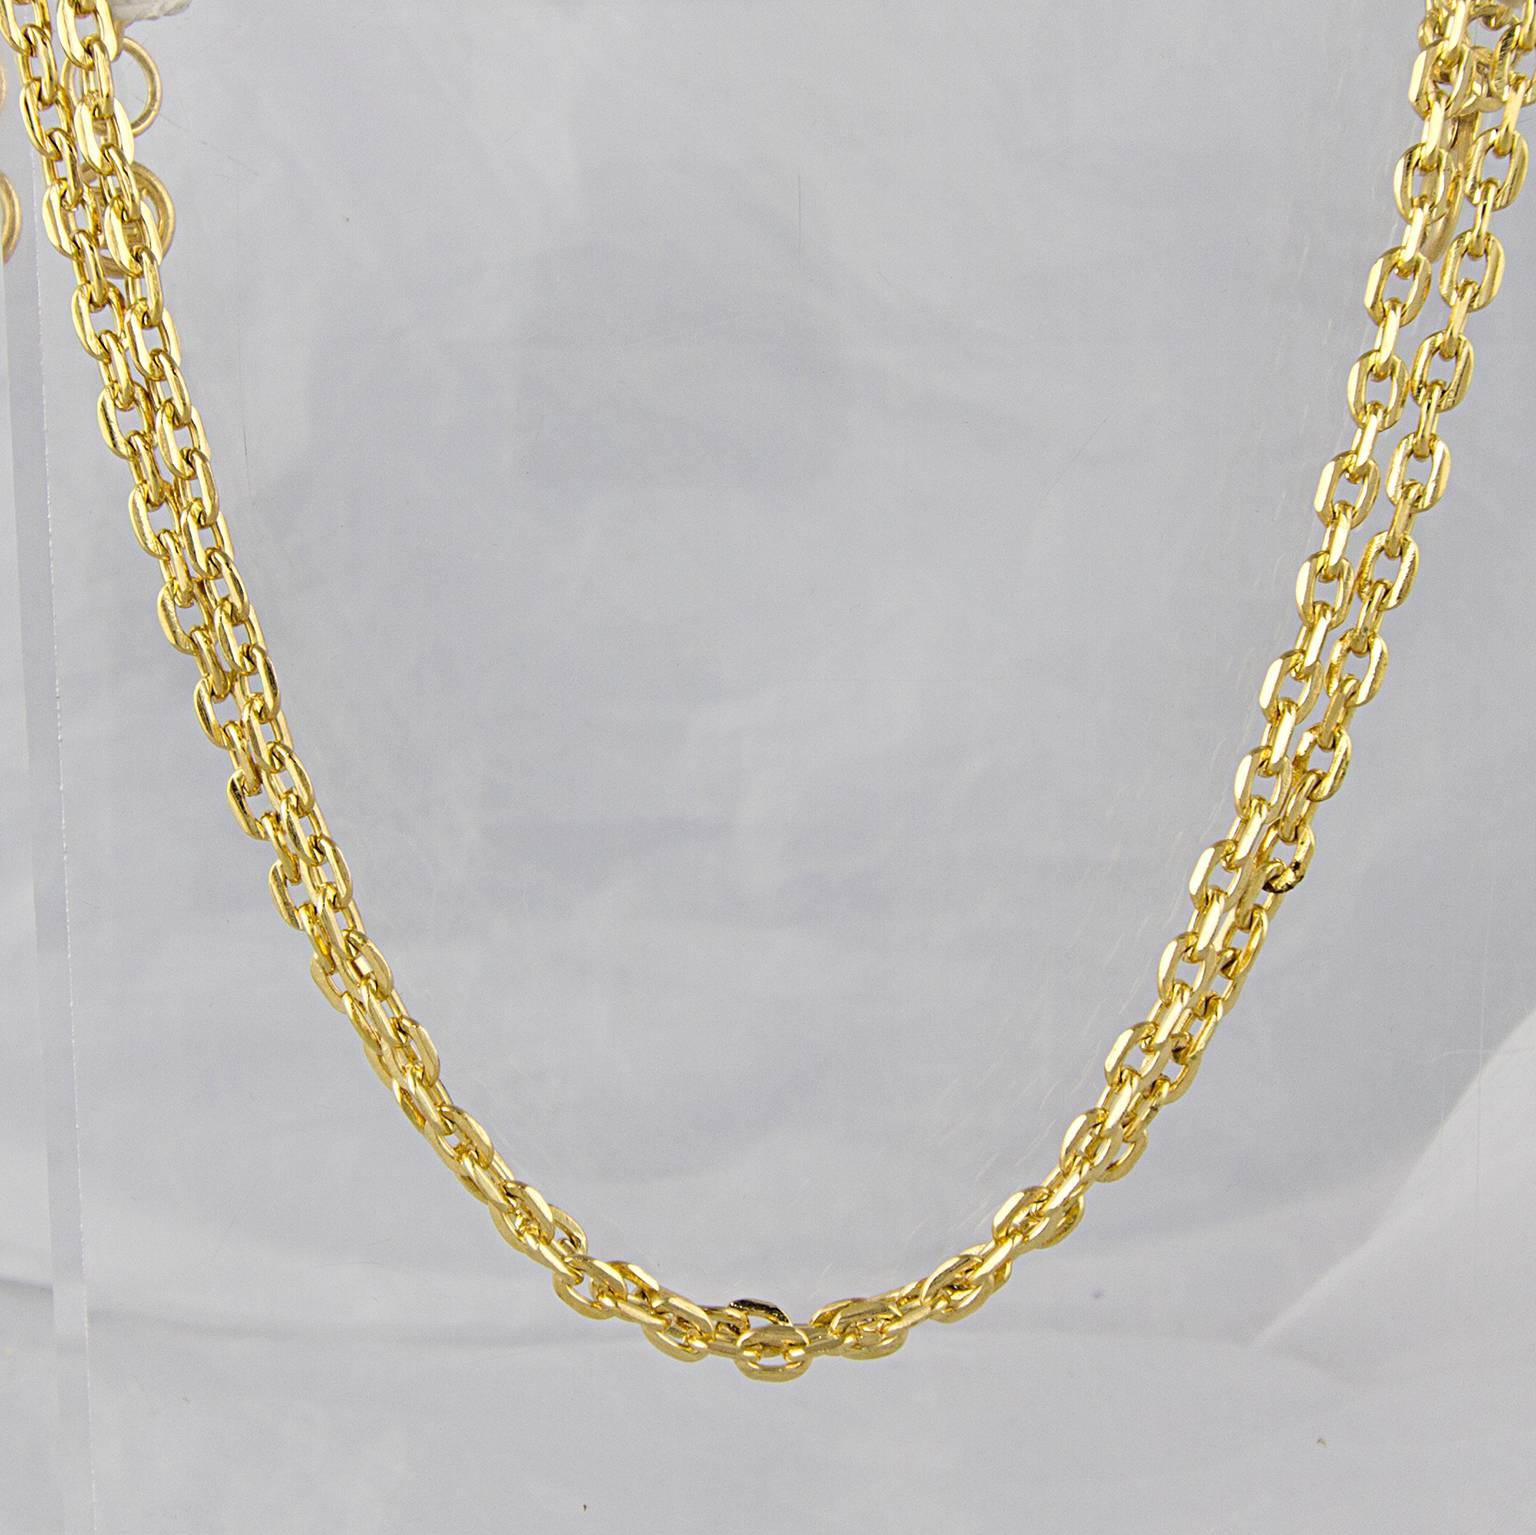 A high carat gold plate delicate Givenchy double chain necklace.
Made in the 1990's.
Fully signed. 
In a perfect condition. 
Don't hesitate to contact us with any queries or image requests.